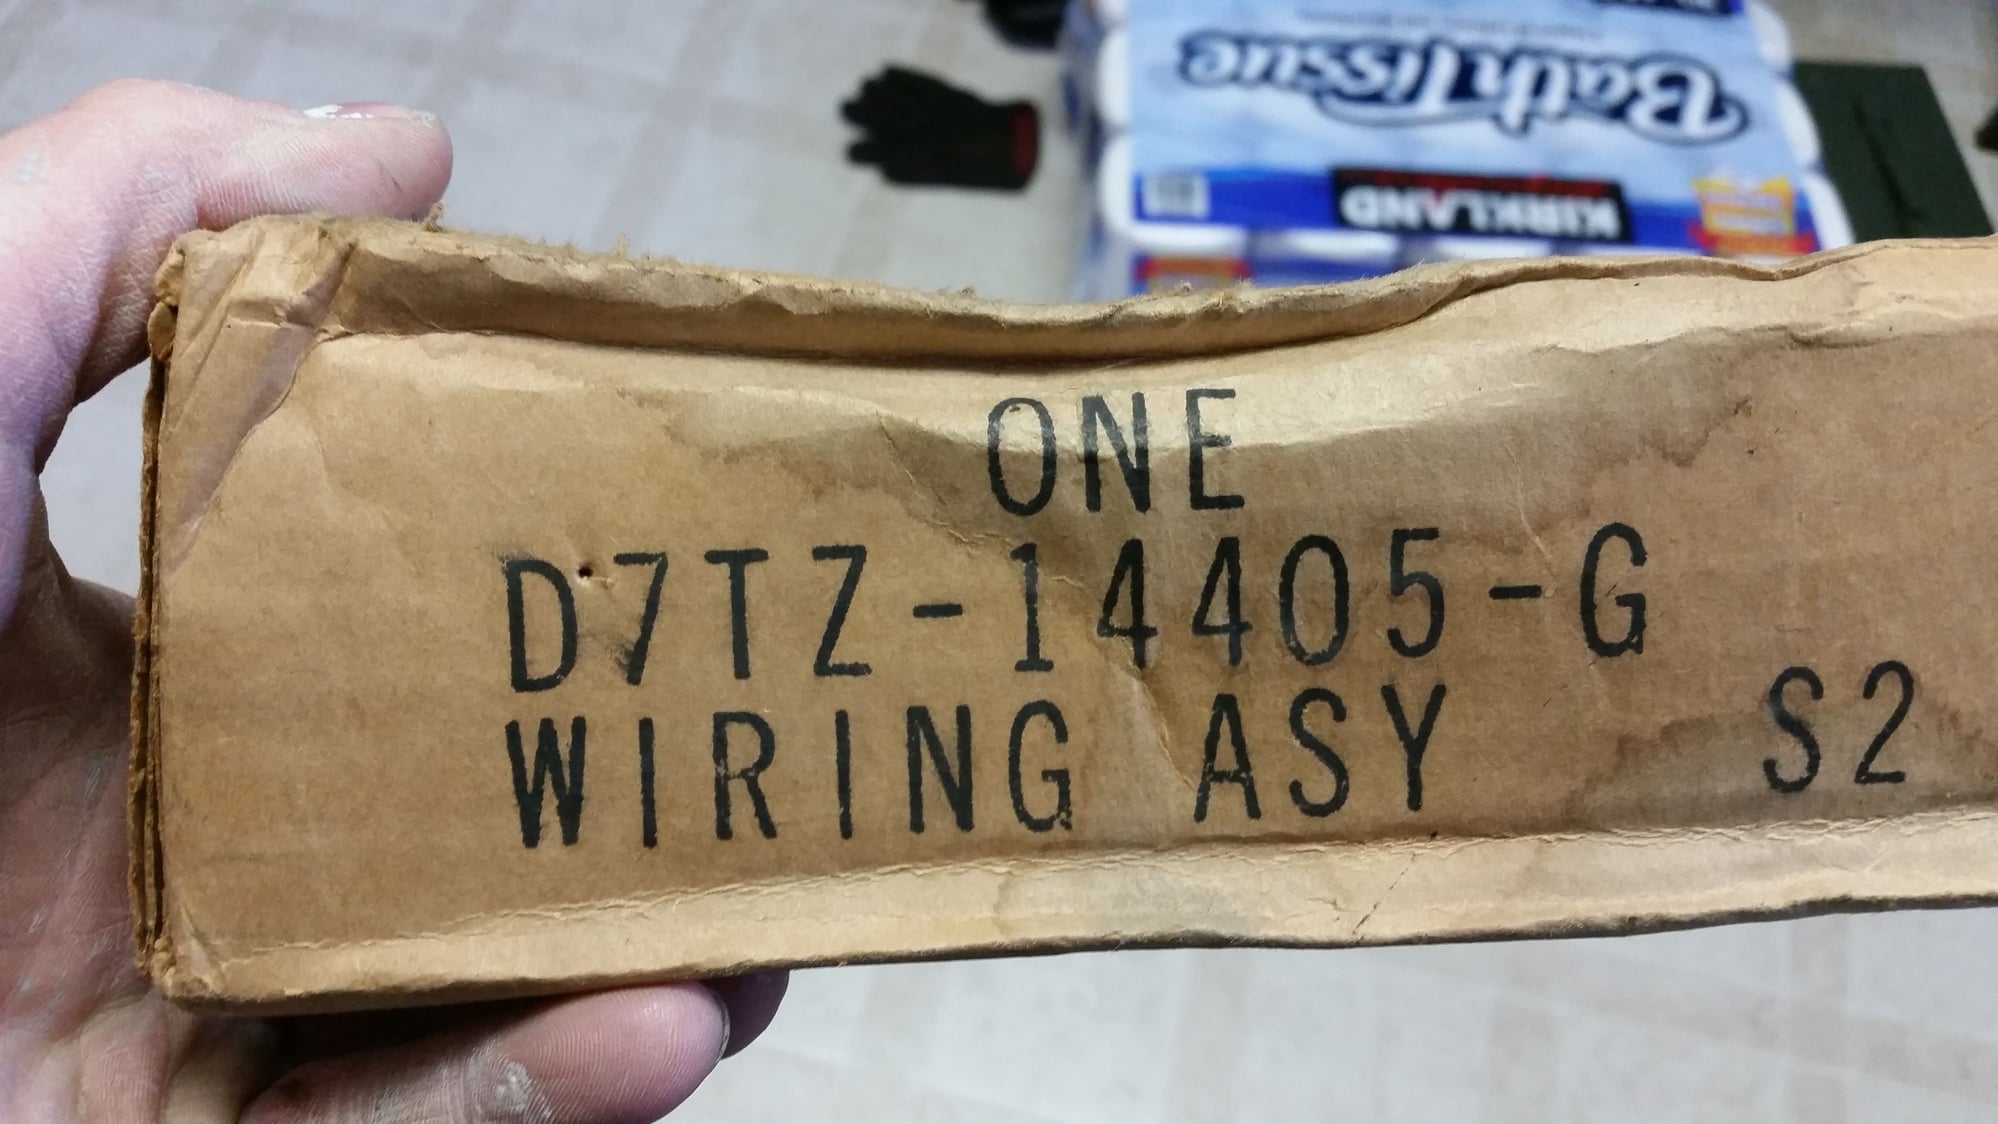 NOS wiring 73-79 Frame harness/Alt harness - Ford Truck Enthusiasts Forums